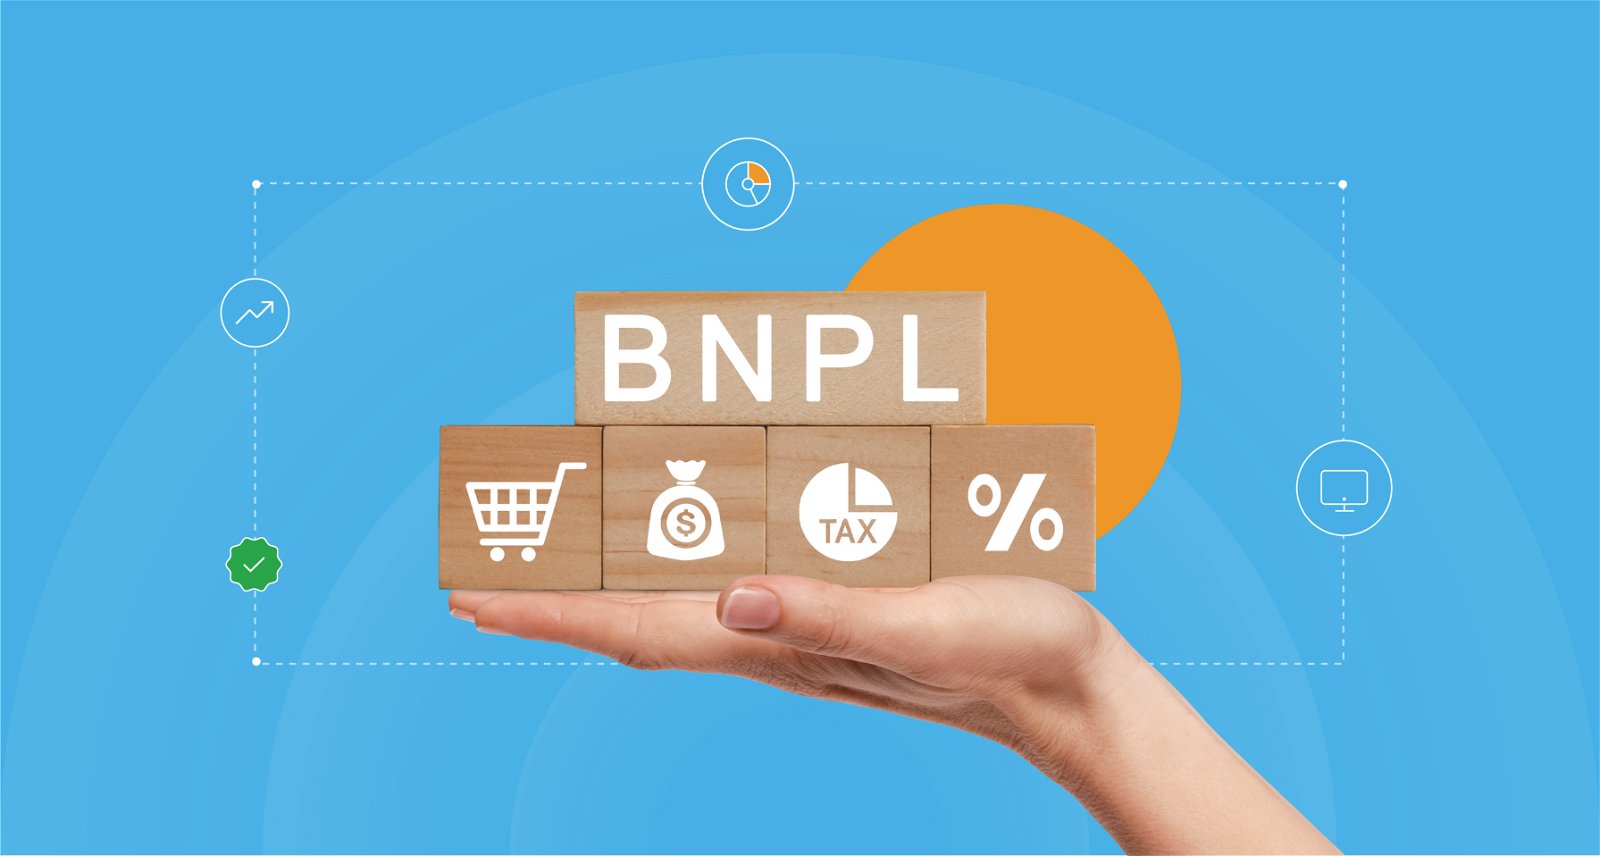 Banks Use Data, Deep Pockets and Trust to Prep BNPL Entry